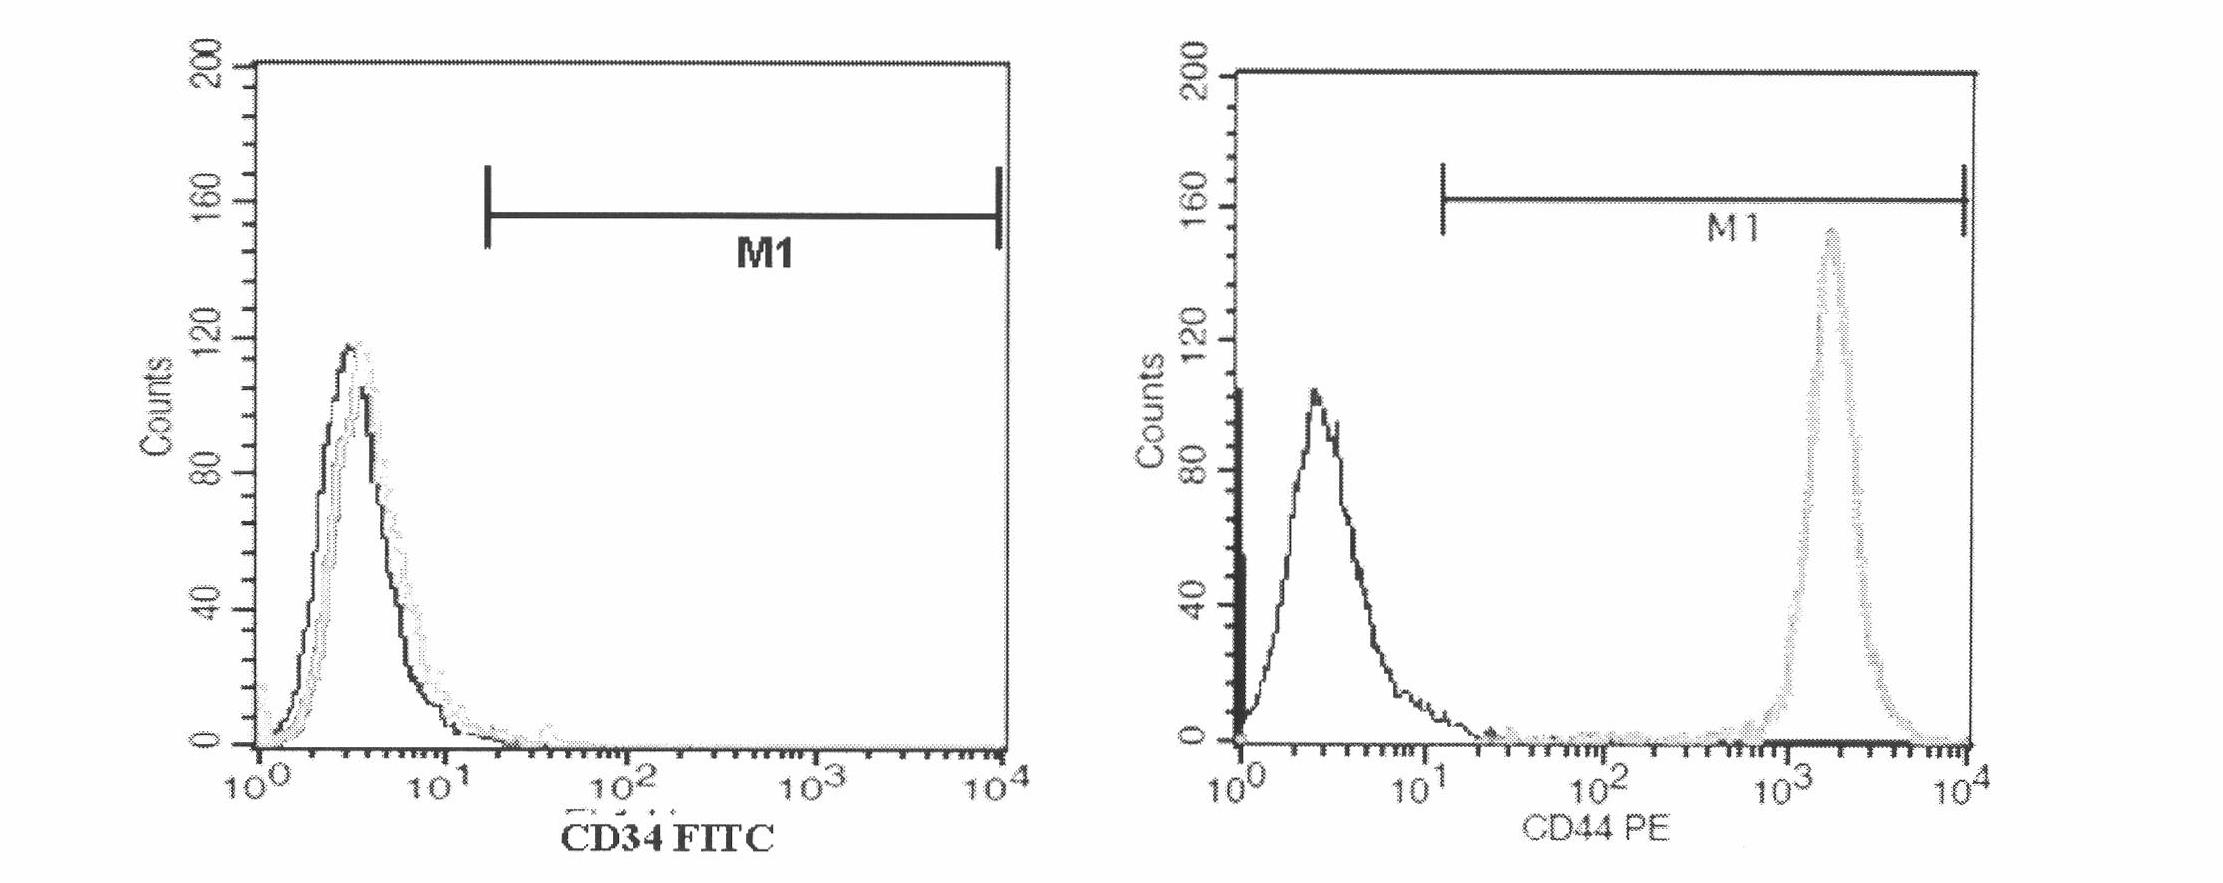 Method for extracting mesenchymal stem cells from trace human fatty tissues and massively culturing